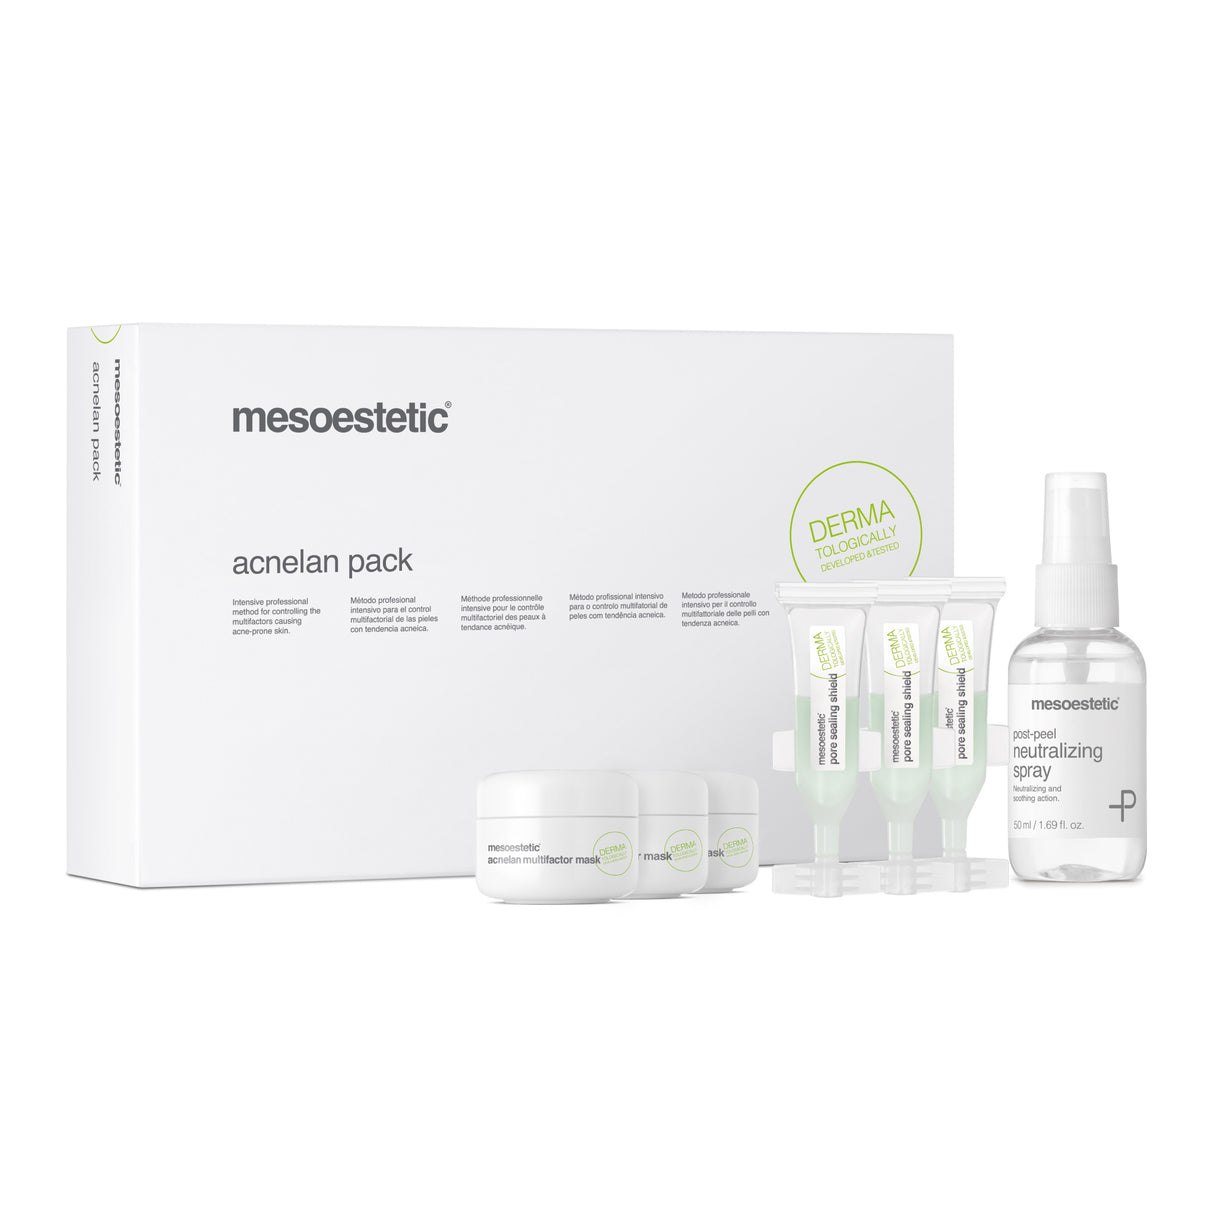 acnelan pack - a method for treating acne of varying degrees of severity, treating oily, problematic skin